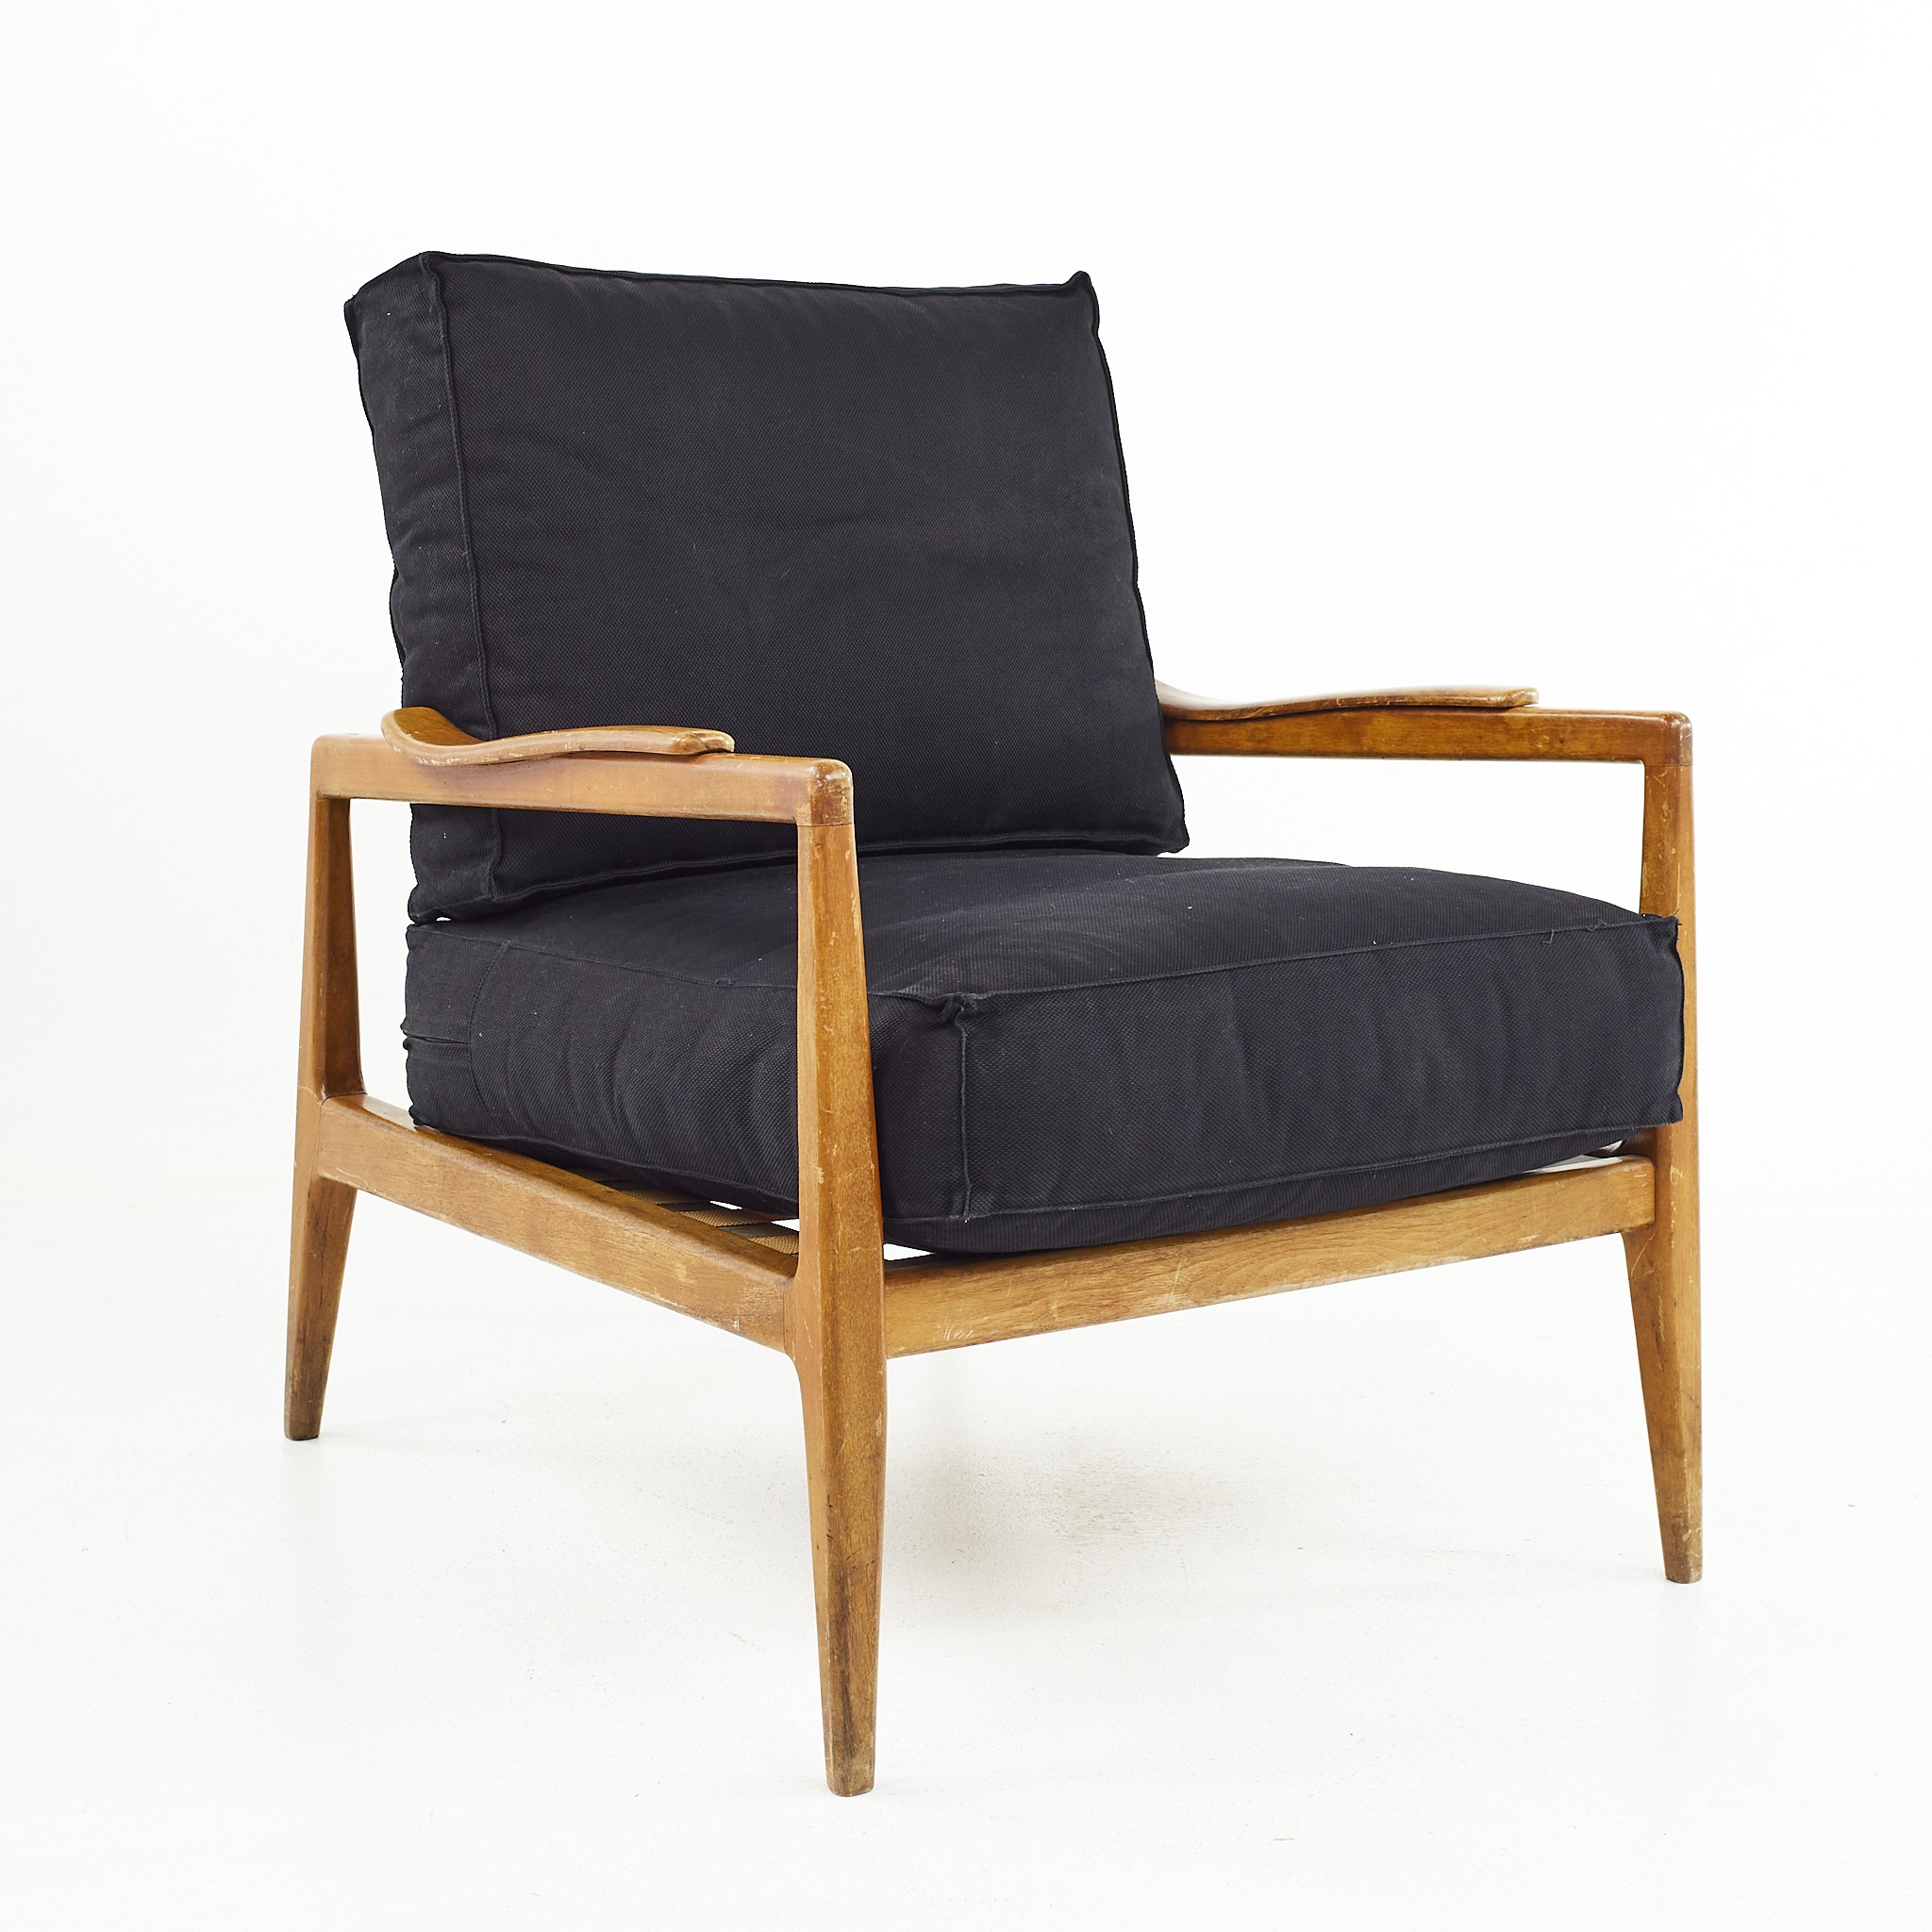 Edmond Spence Urban-aire Mid Century Walnut Lounge Chair with Black Upholstery